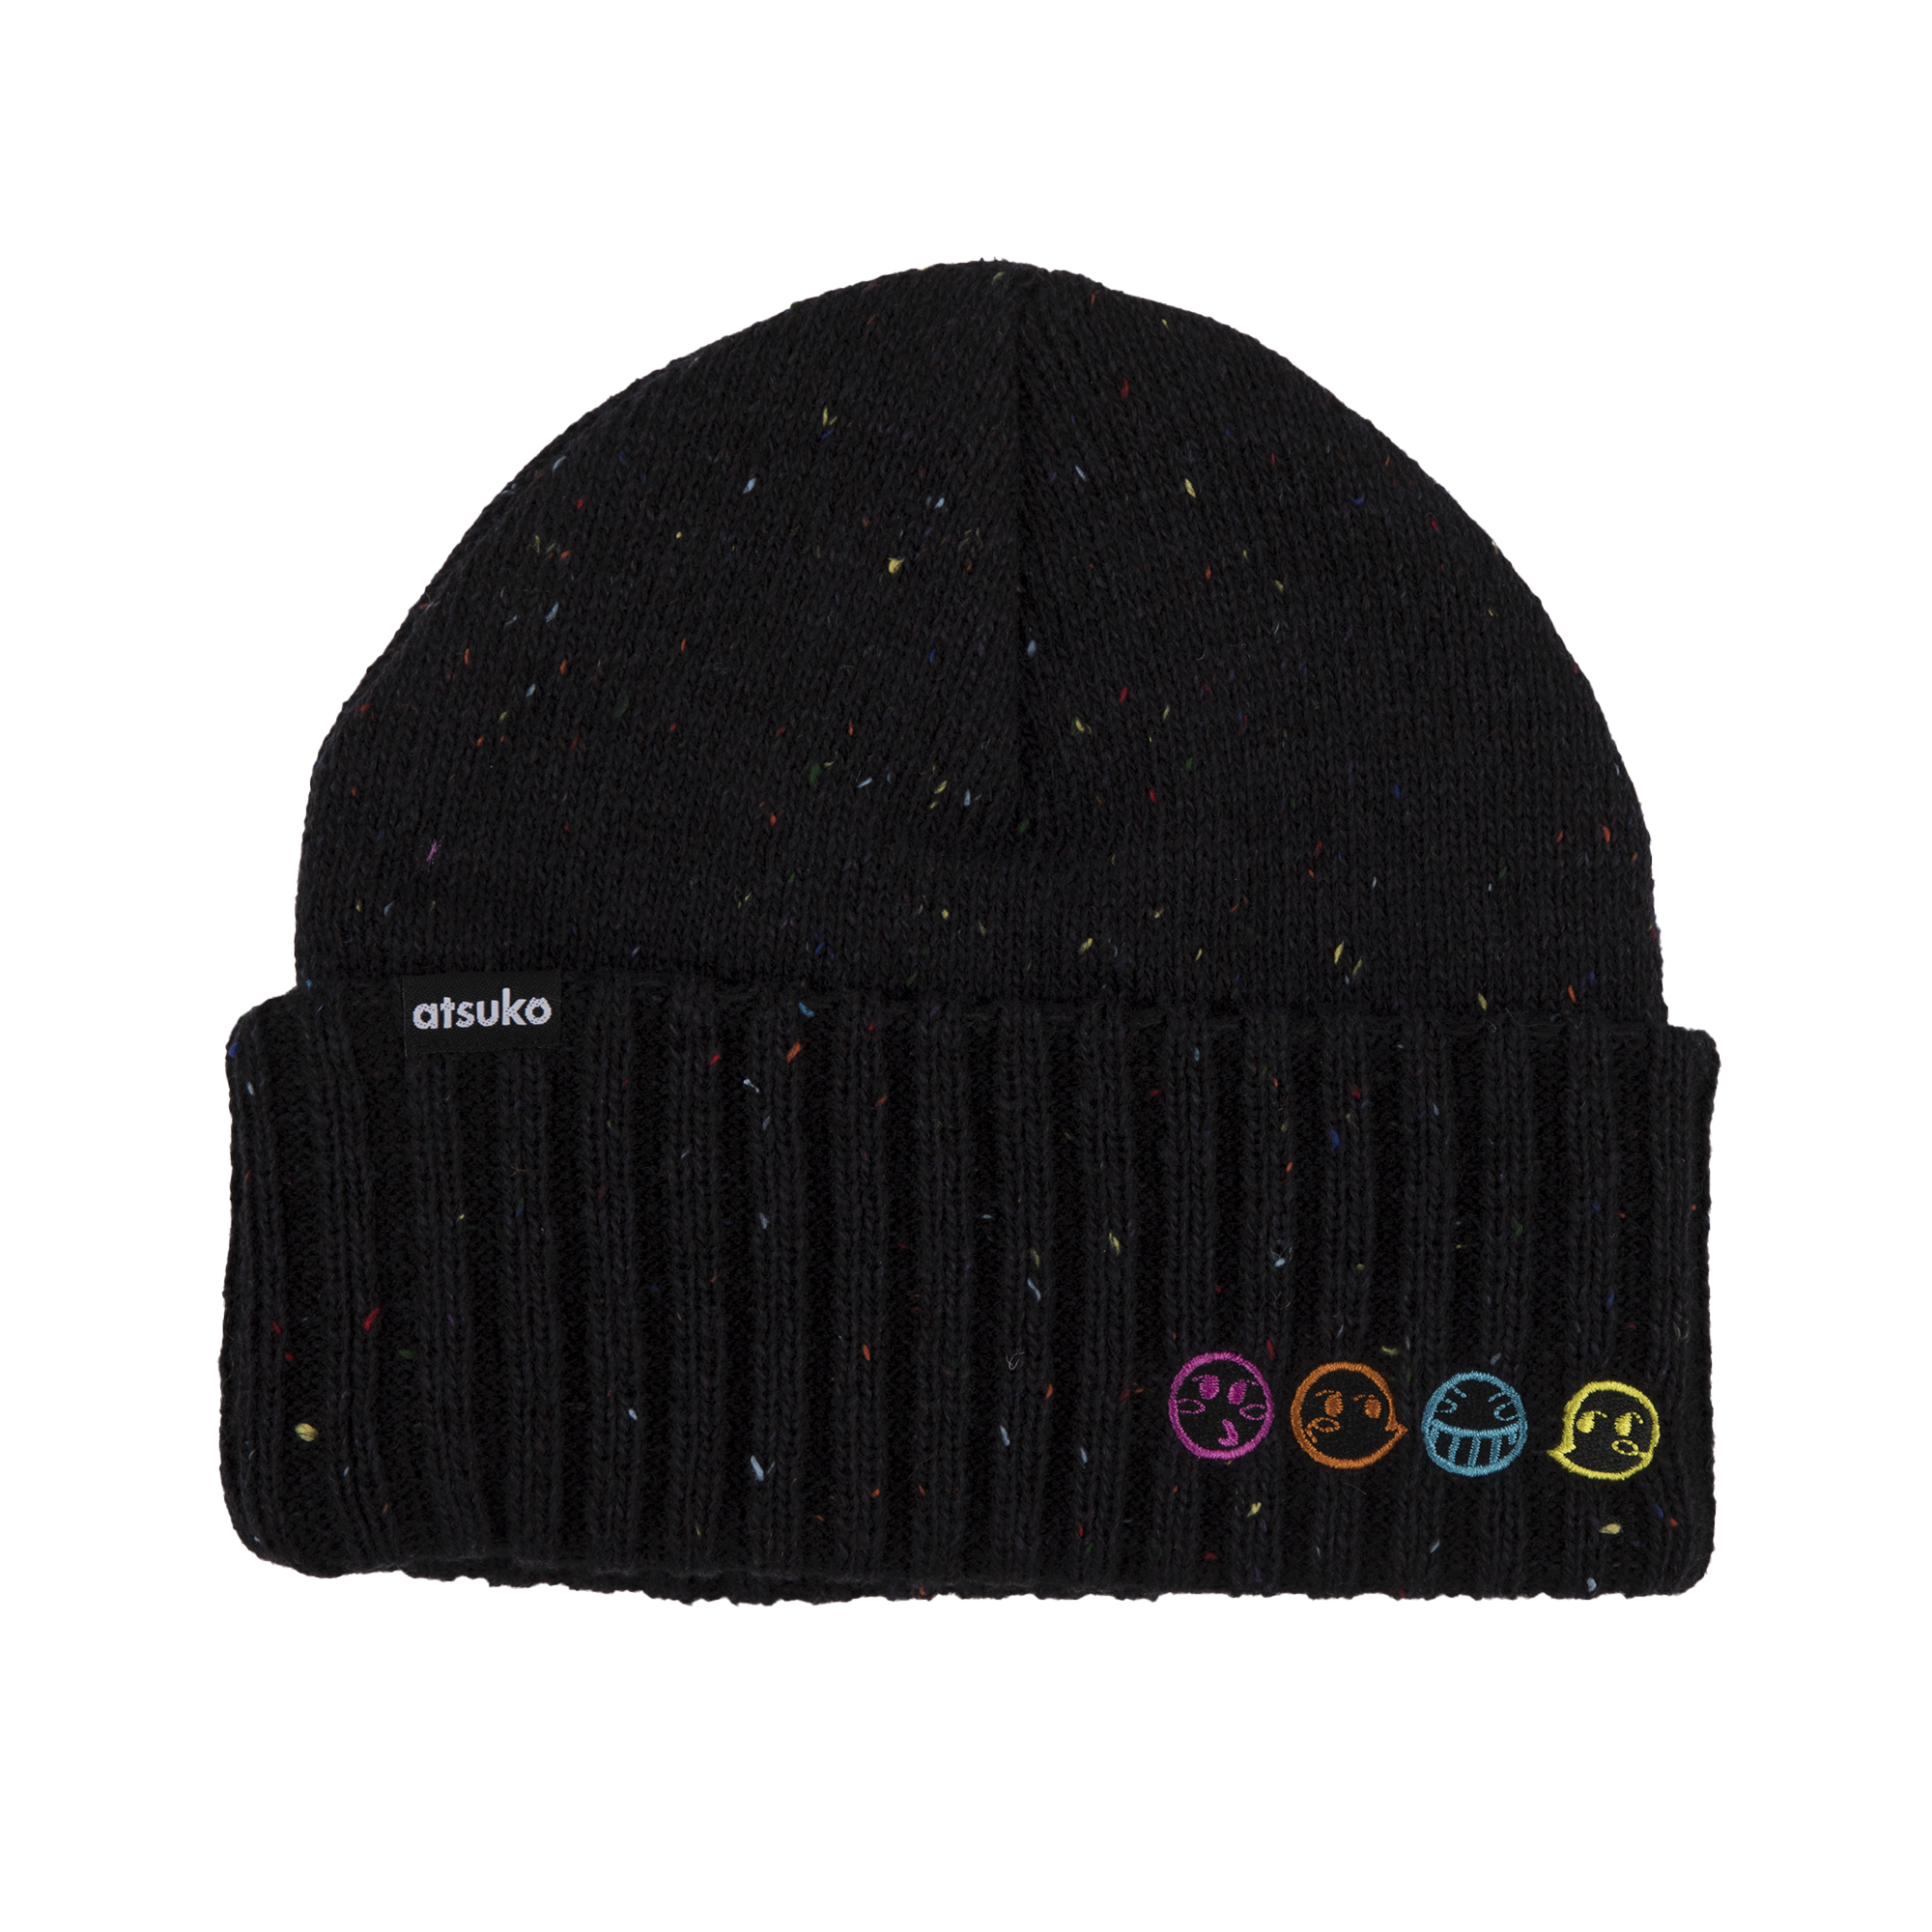 Spike Speckled Beanie